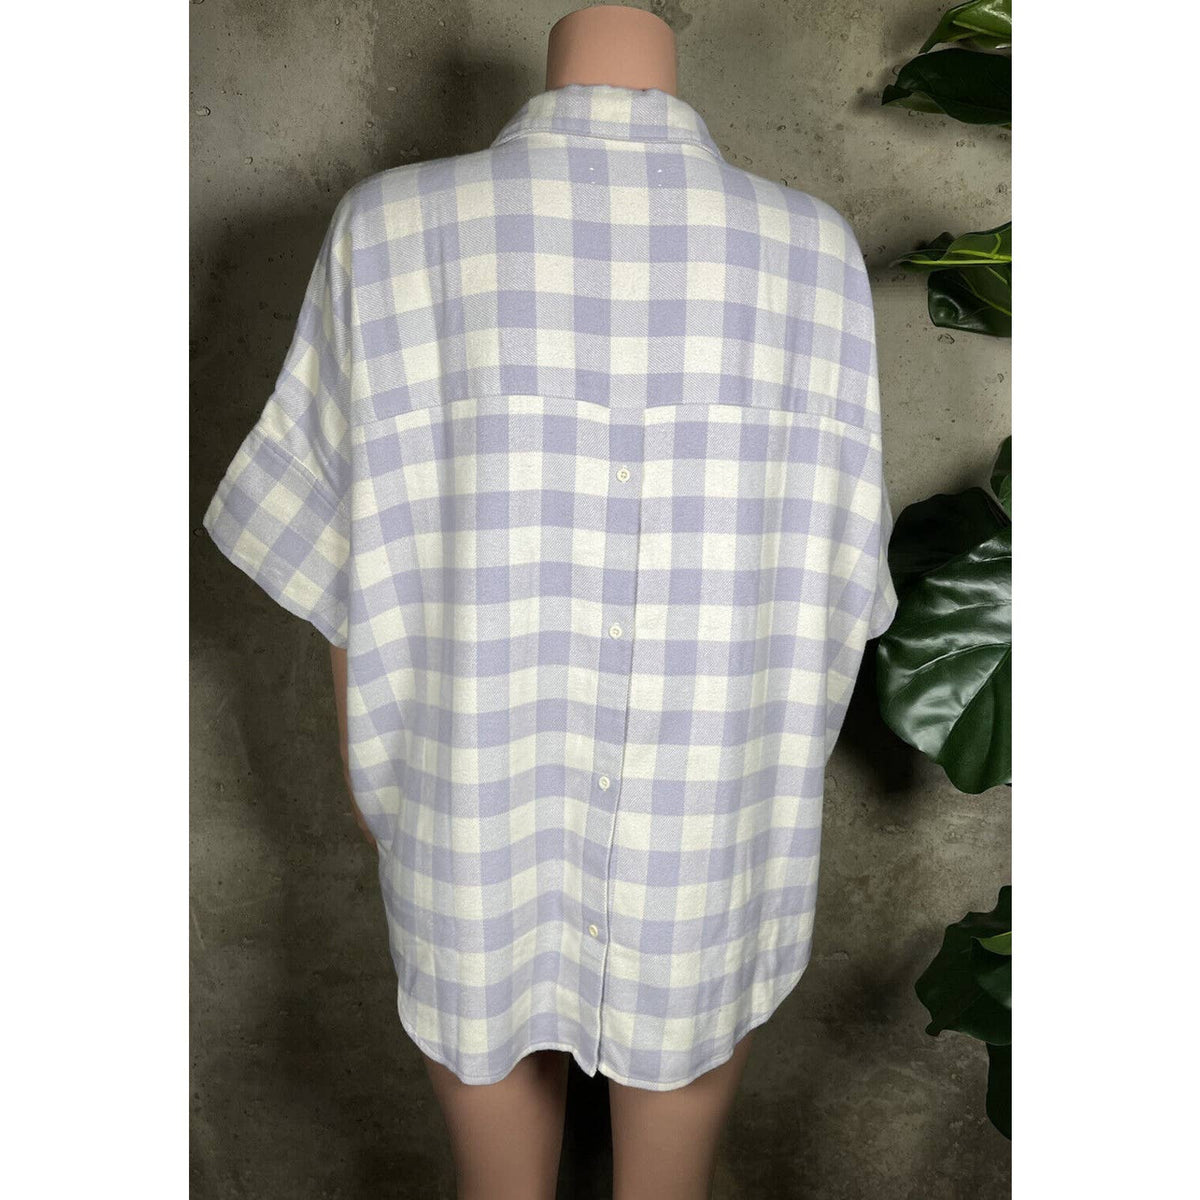 Madewell Flannel Courier Button-Back Shirt in Gingham Check Sz. XXL NEW